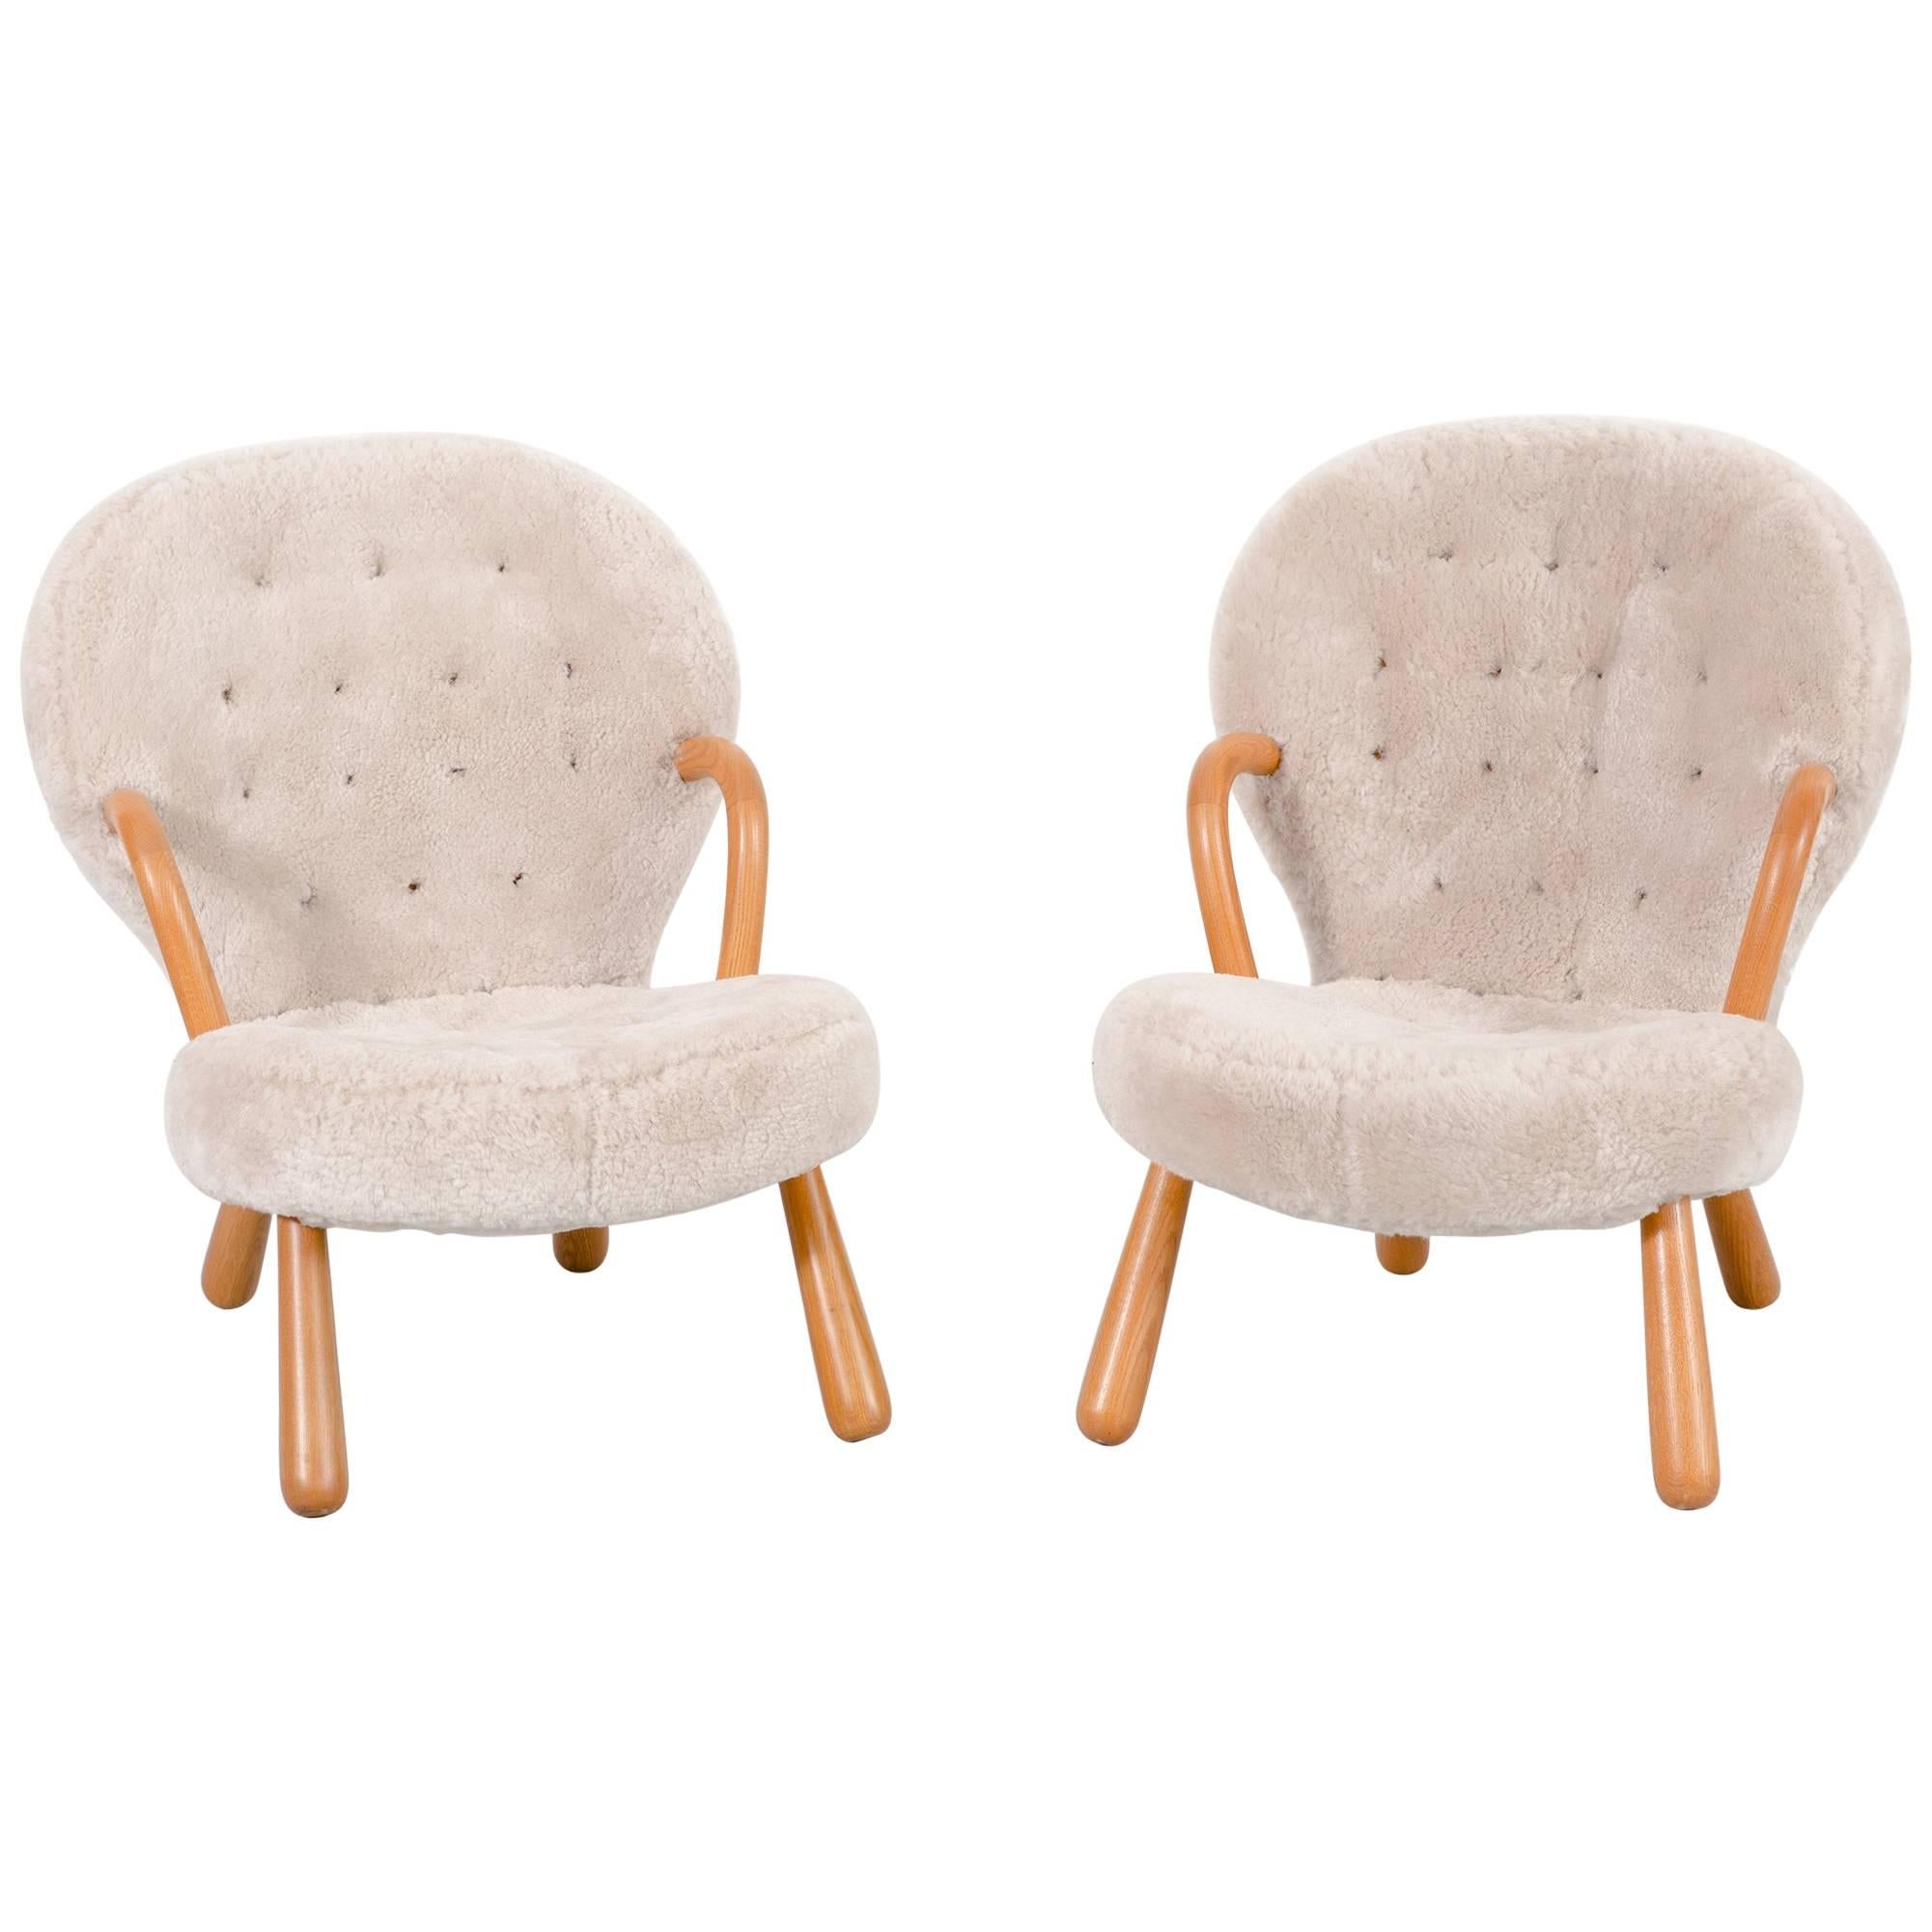 Set of Clam Chairs by Phillip Arctander Freshly Reupholstered in Sheepskin